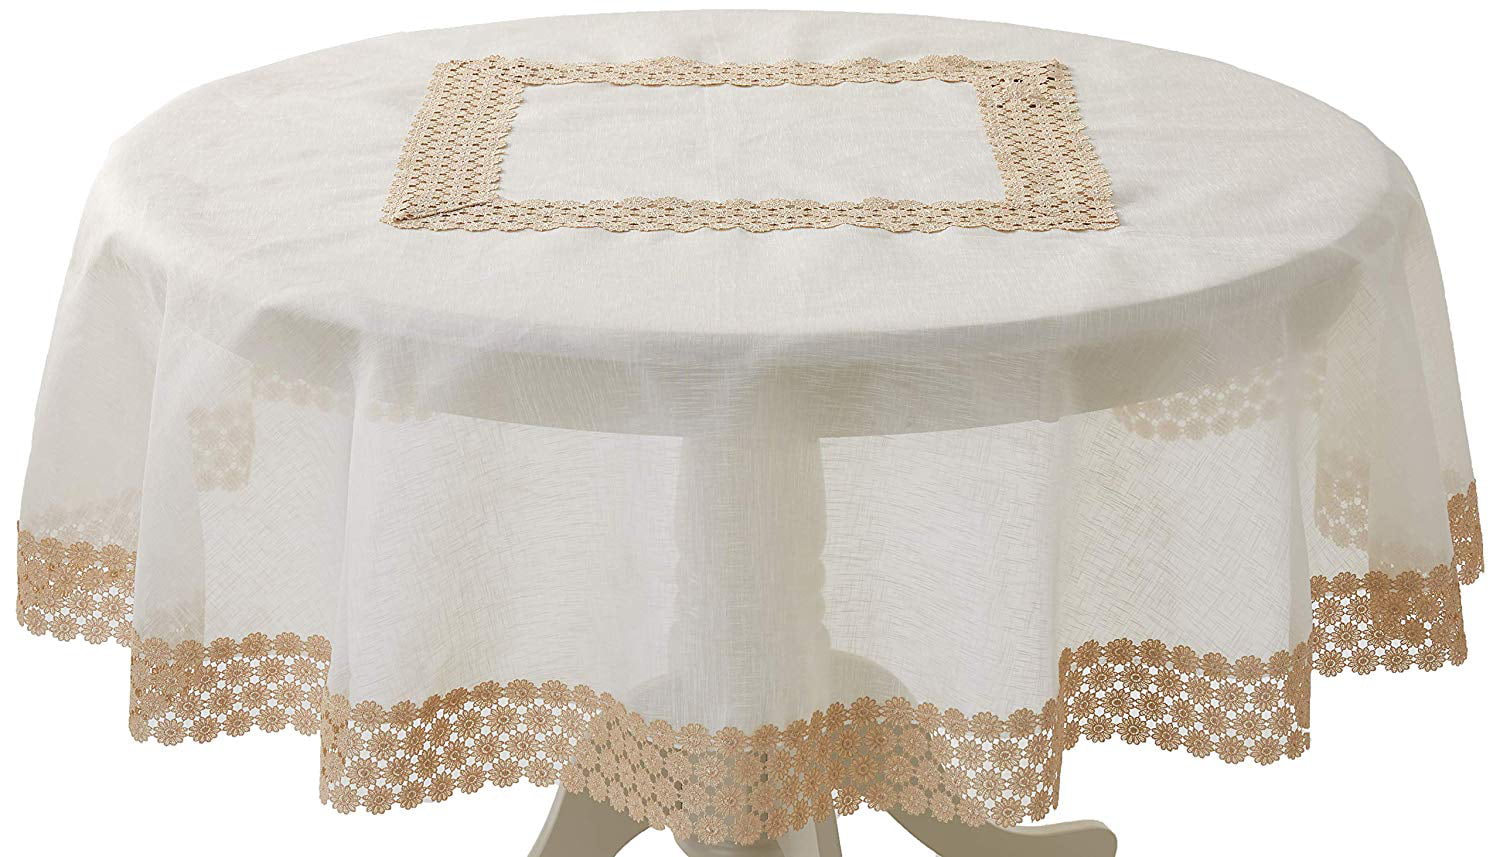 Rectangle Tablecloths Violet Linen Legacy Cobblestone Pattern Polyester Jacquard Macrame Lace Border Seats 16 to 18 People Beige 70 X 180